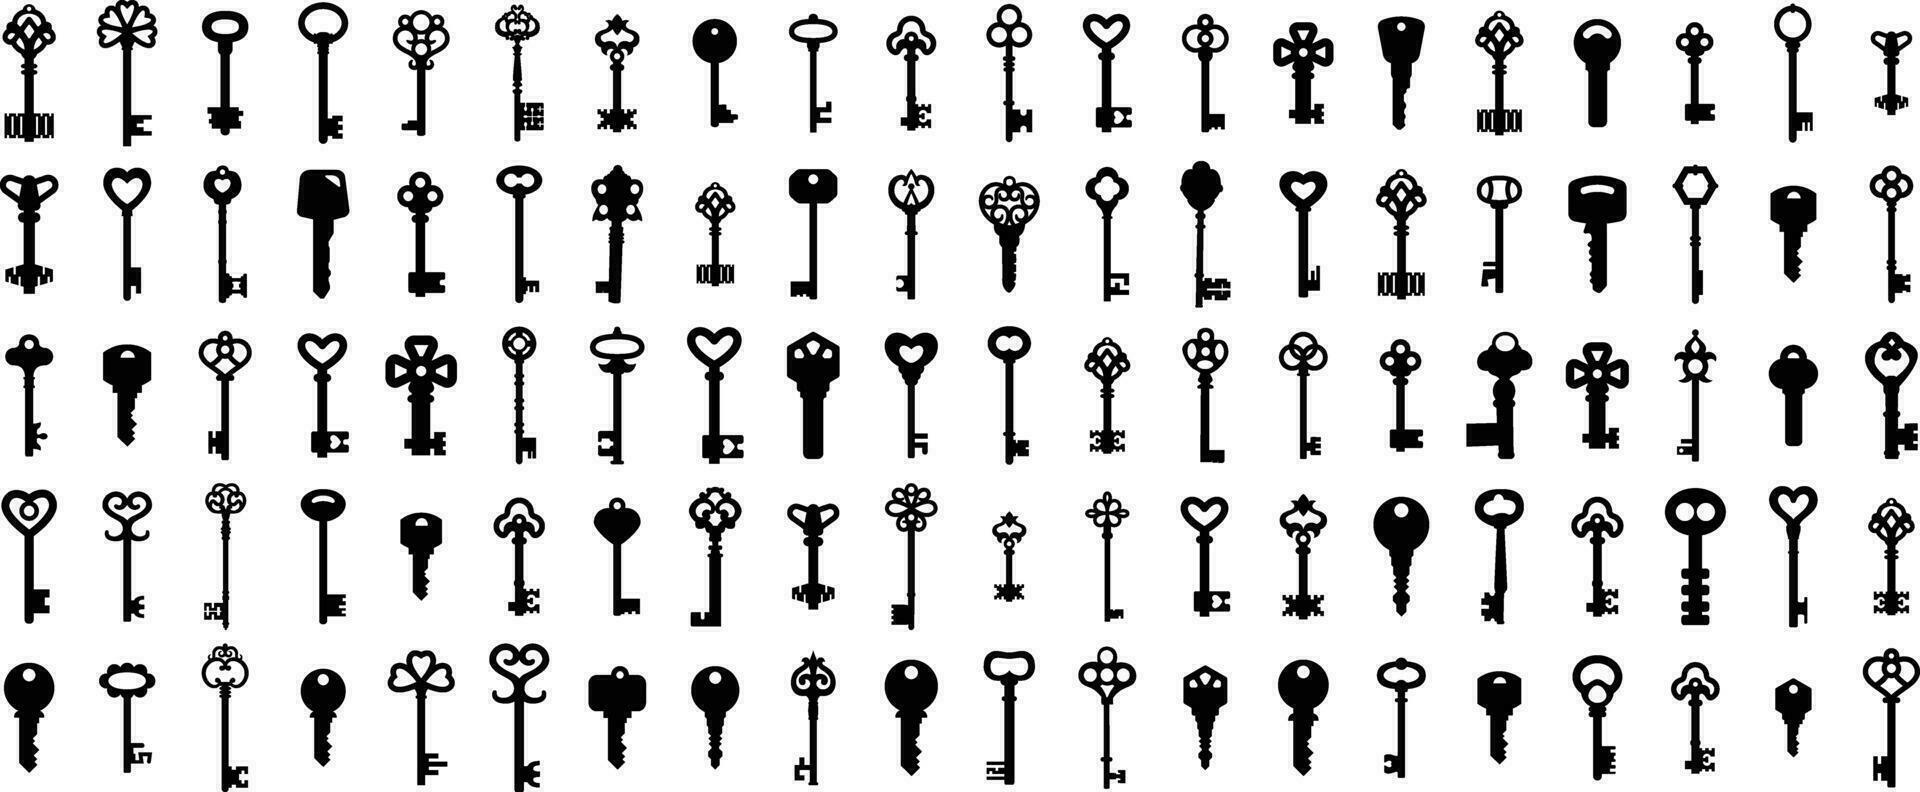 Keys icons vector silhouettes